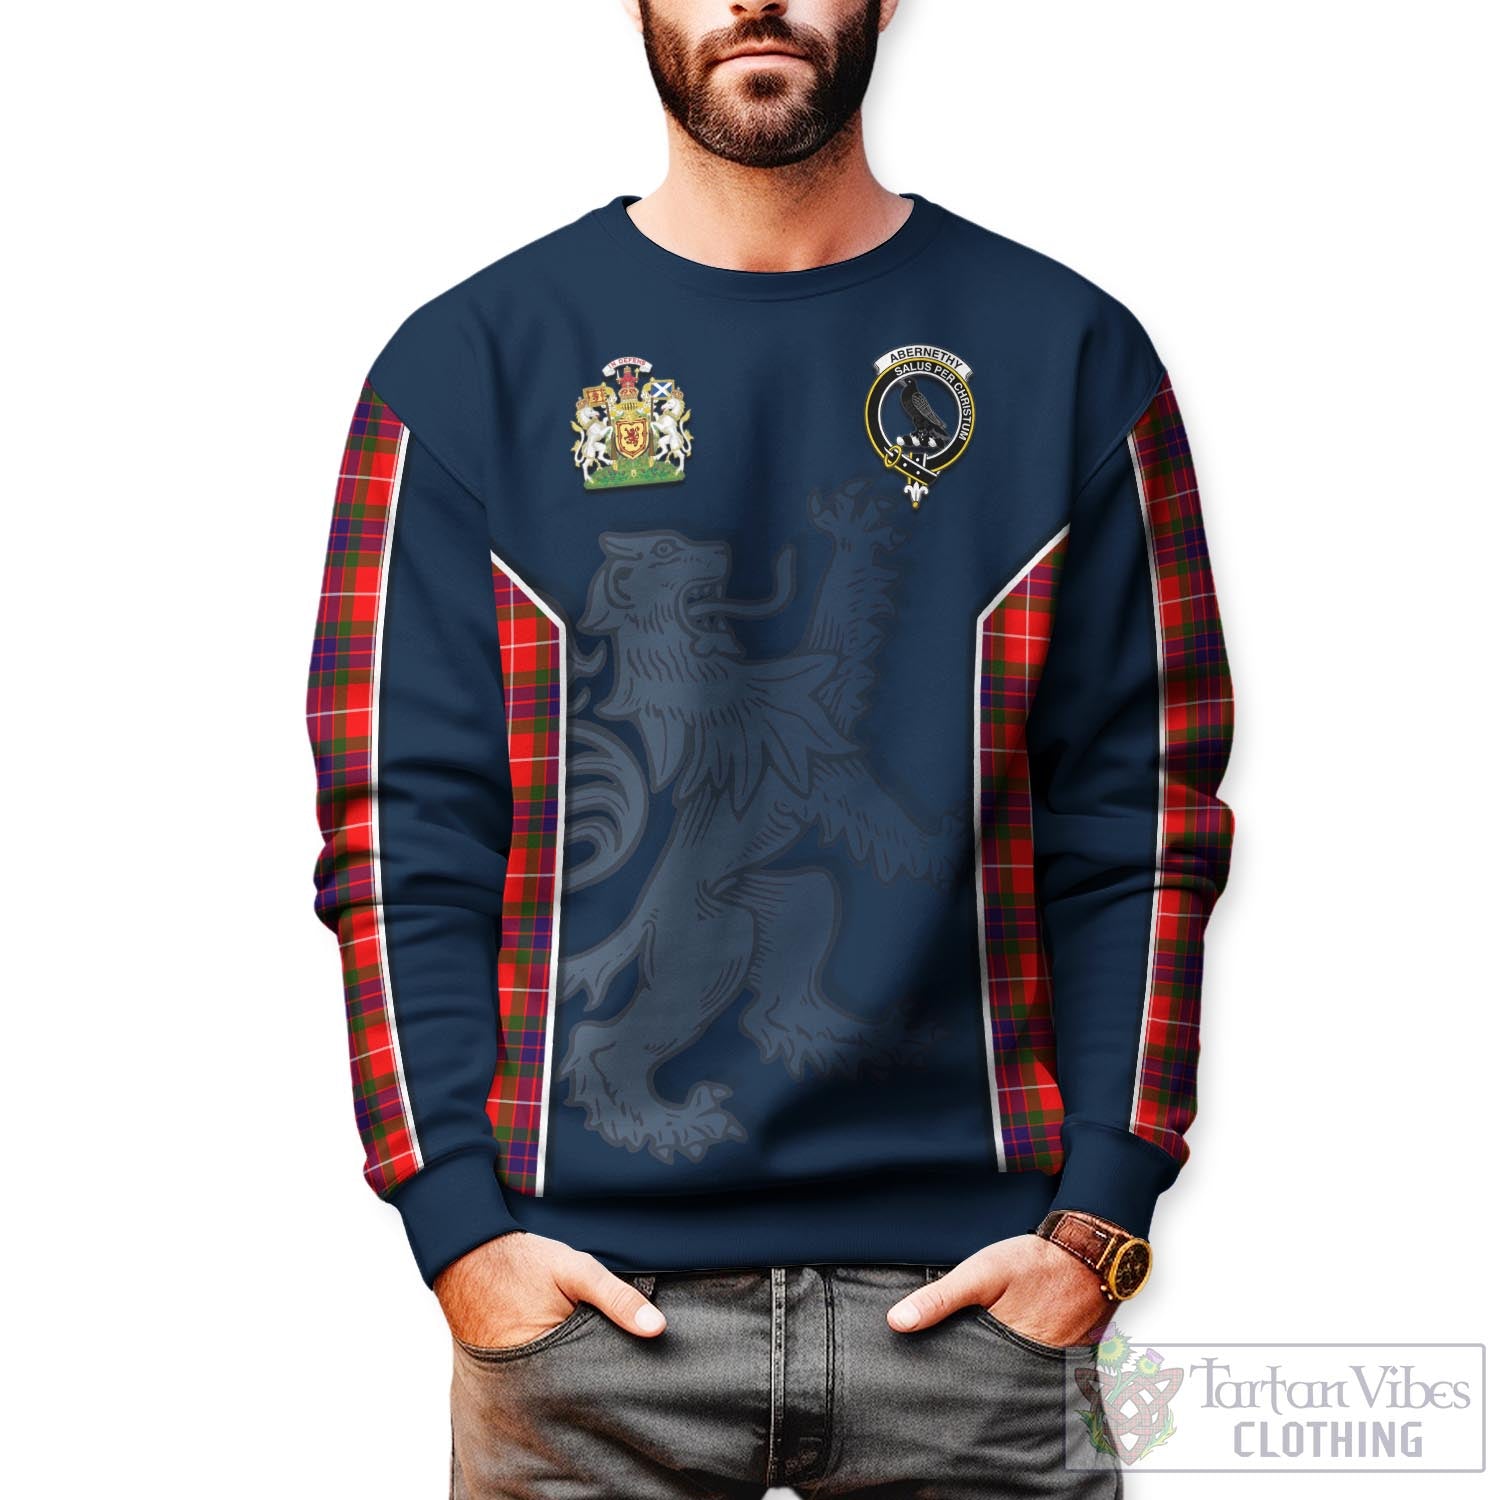 Tartan Vibes Clothing Abernethy Tartan Sweater with Family Crest and Lion Rampant Vibes Sport Style